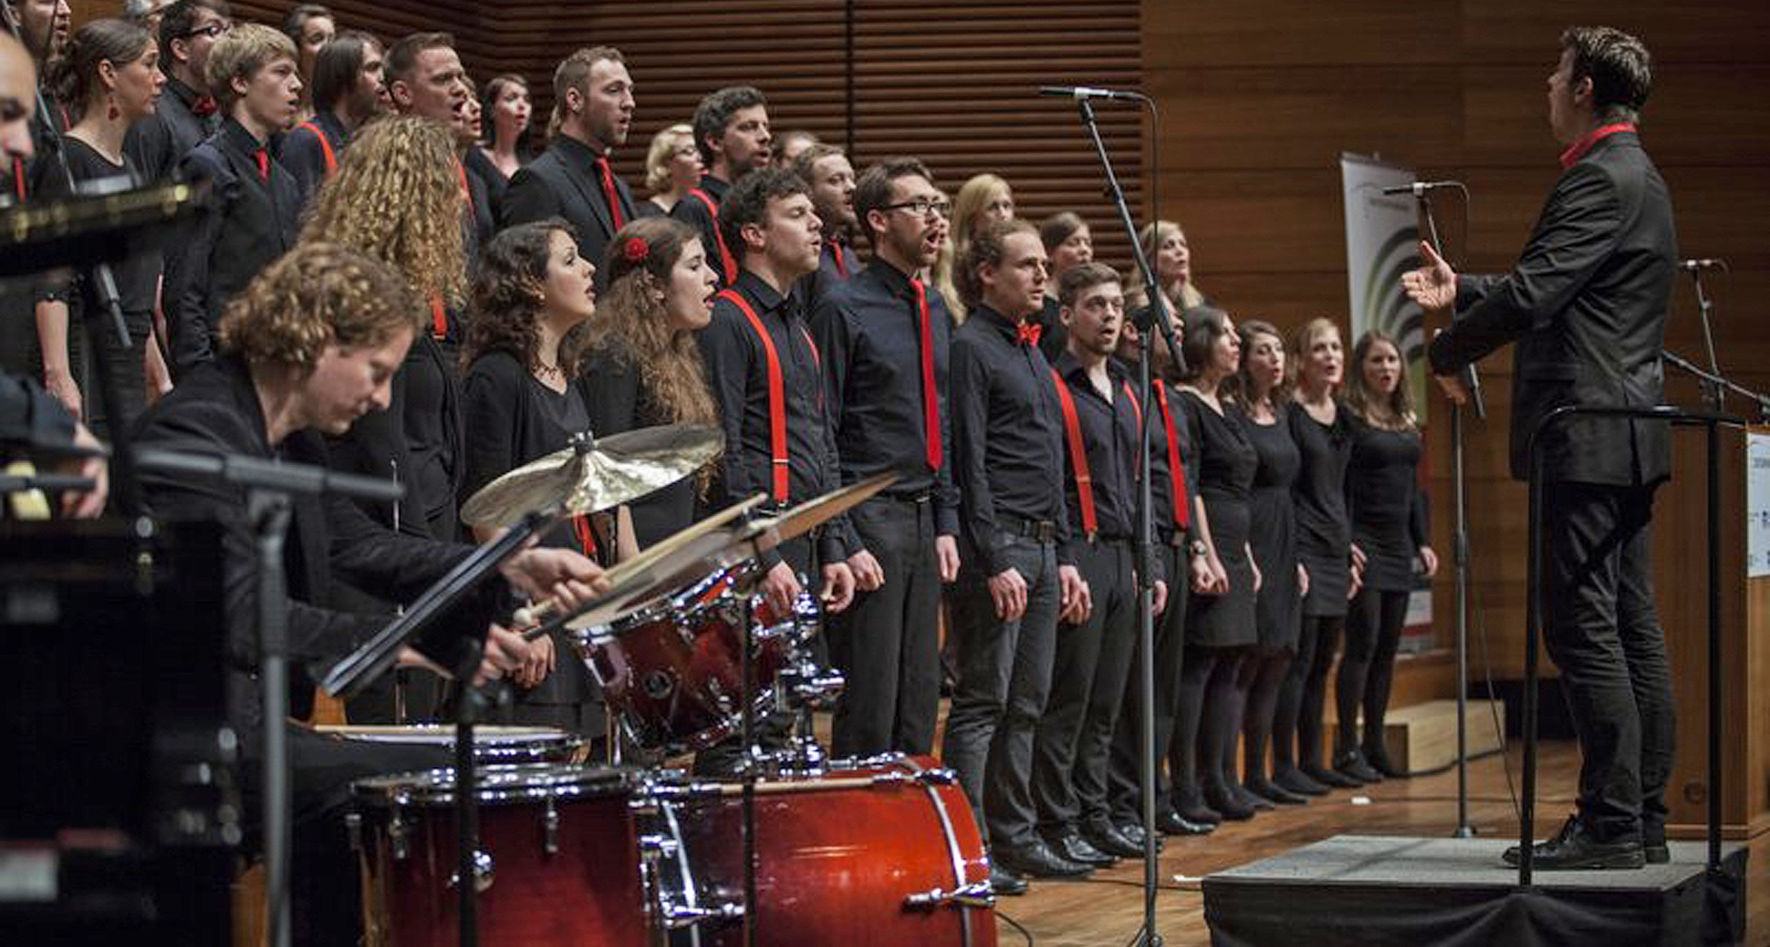 Jazz Choir of the University of Cologne